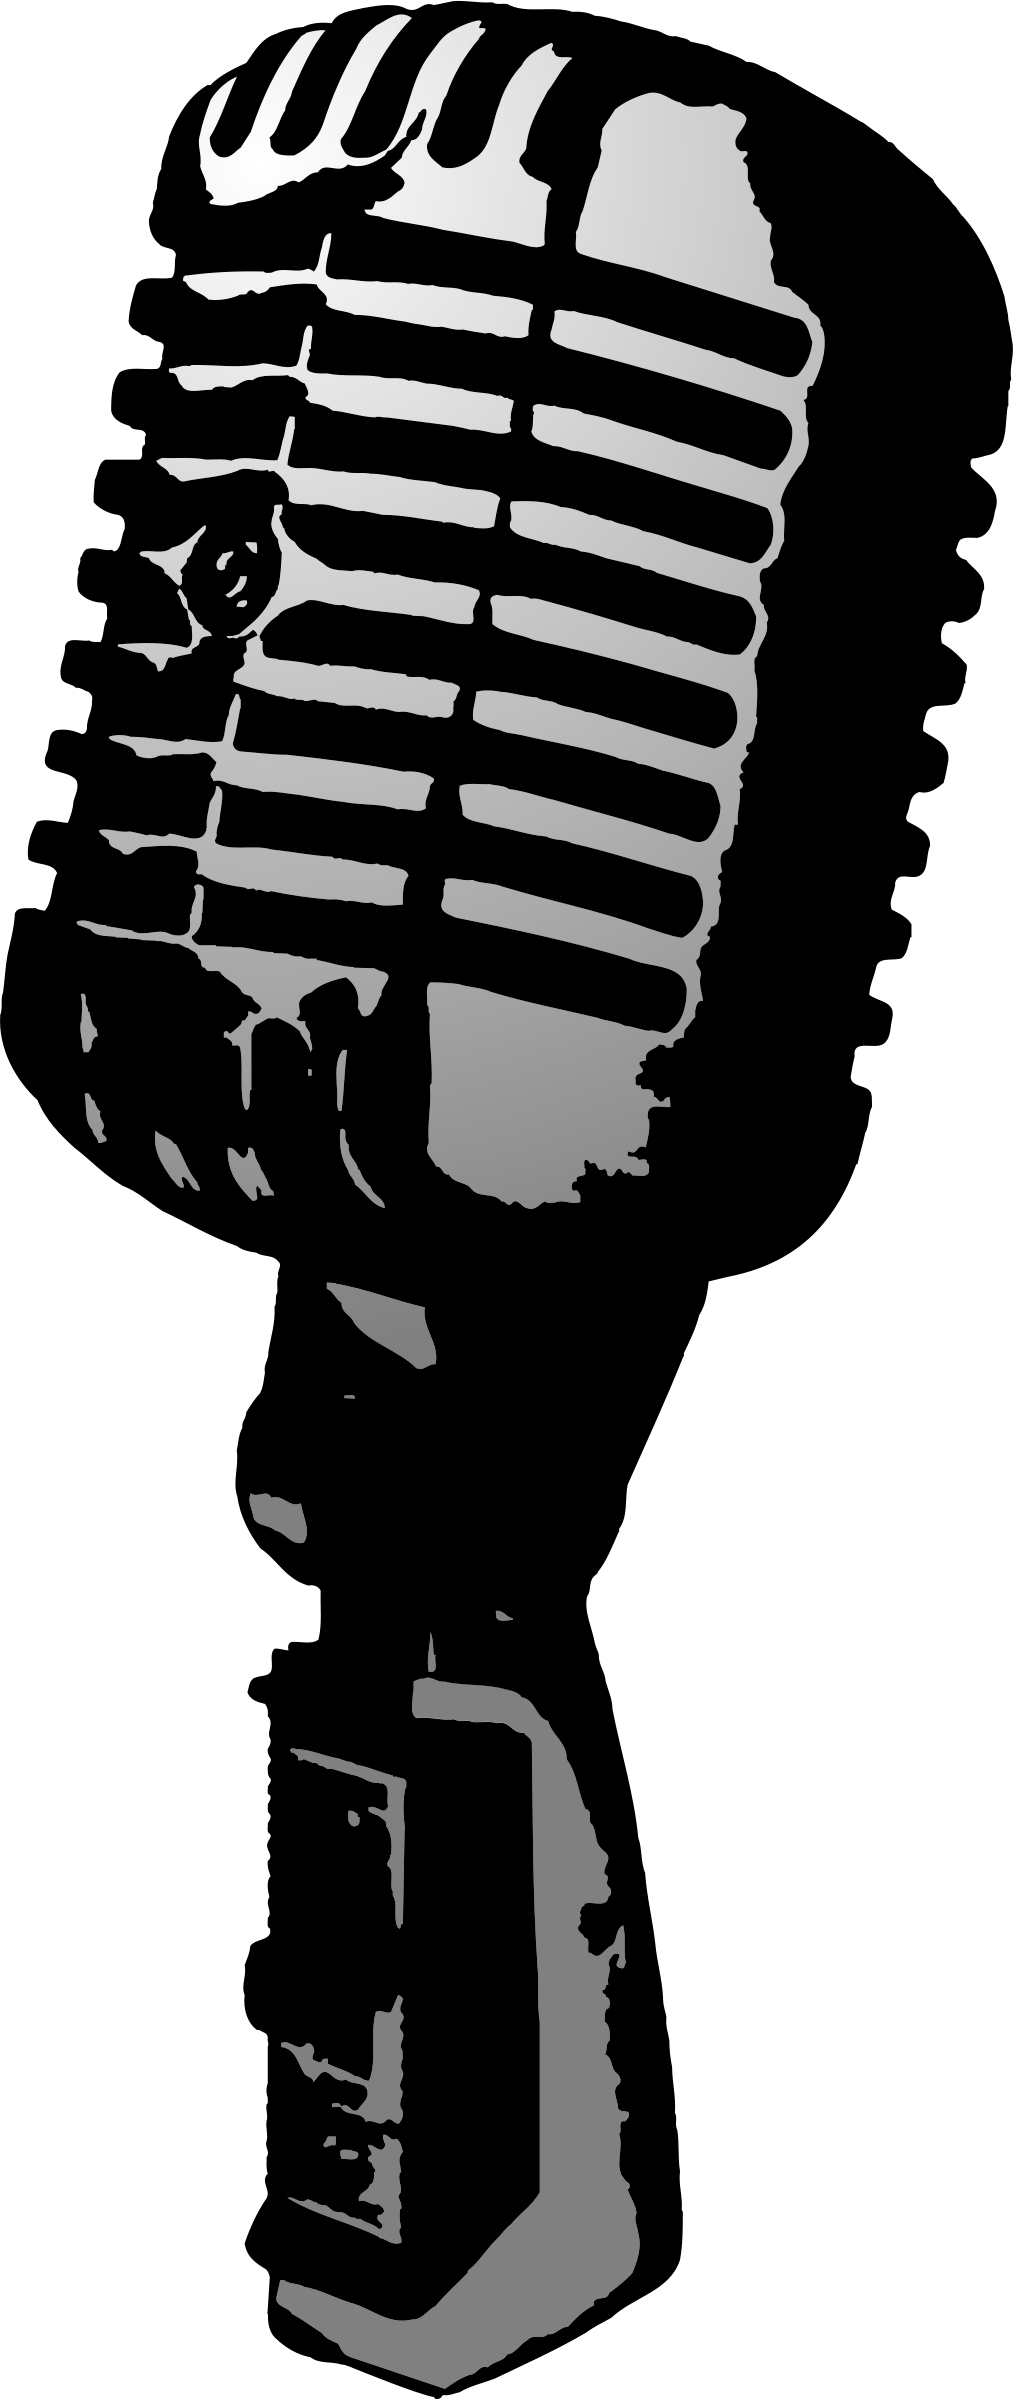 Old Microphone Hd Image Clipart